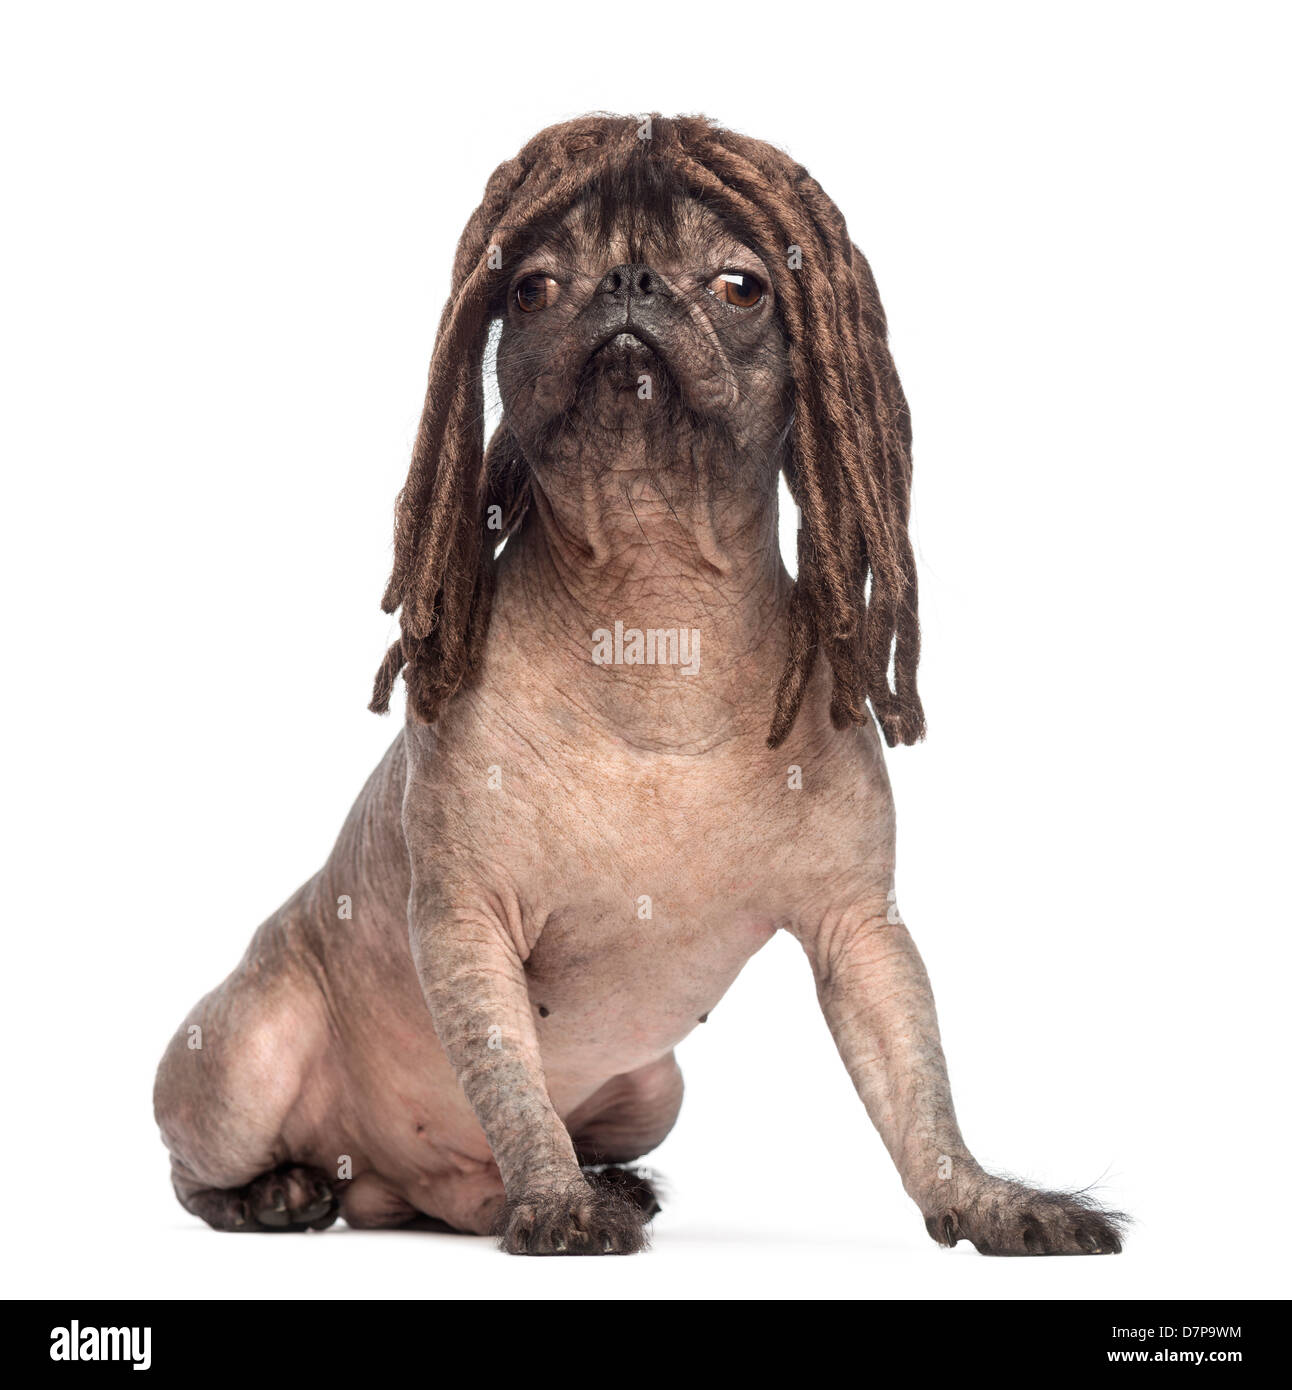 Hairless Mixed breed, a cross between a French Bulldog and Chinese Crested Dog, wearing dreadlock wig against white background Stock Photo